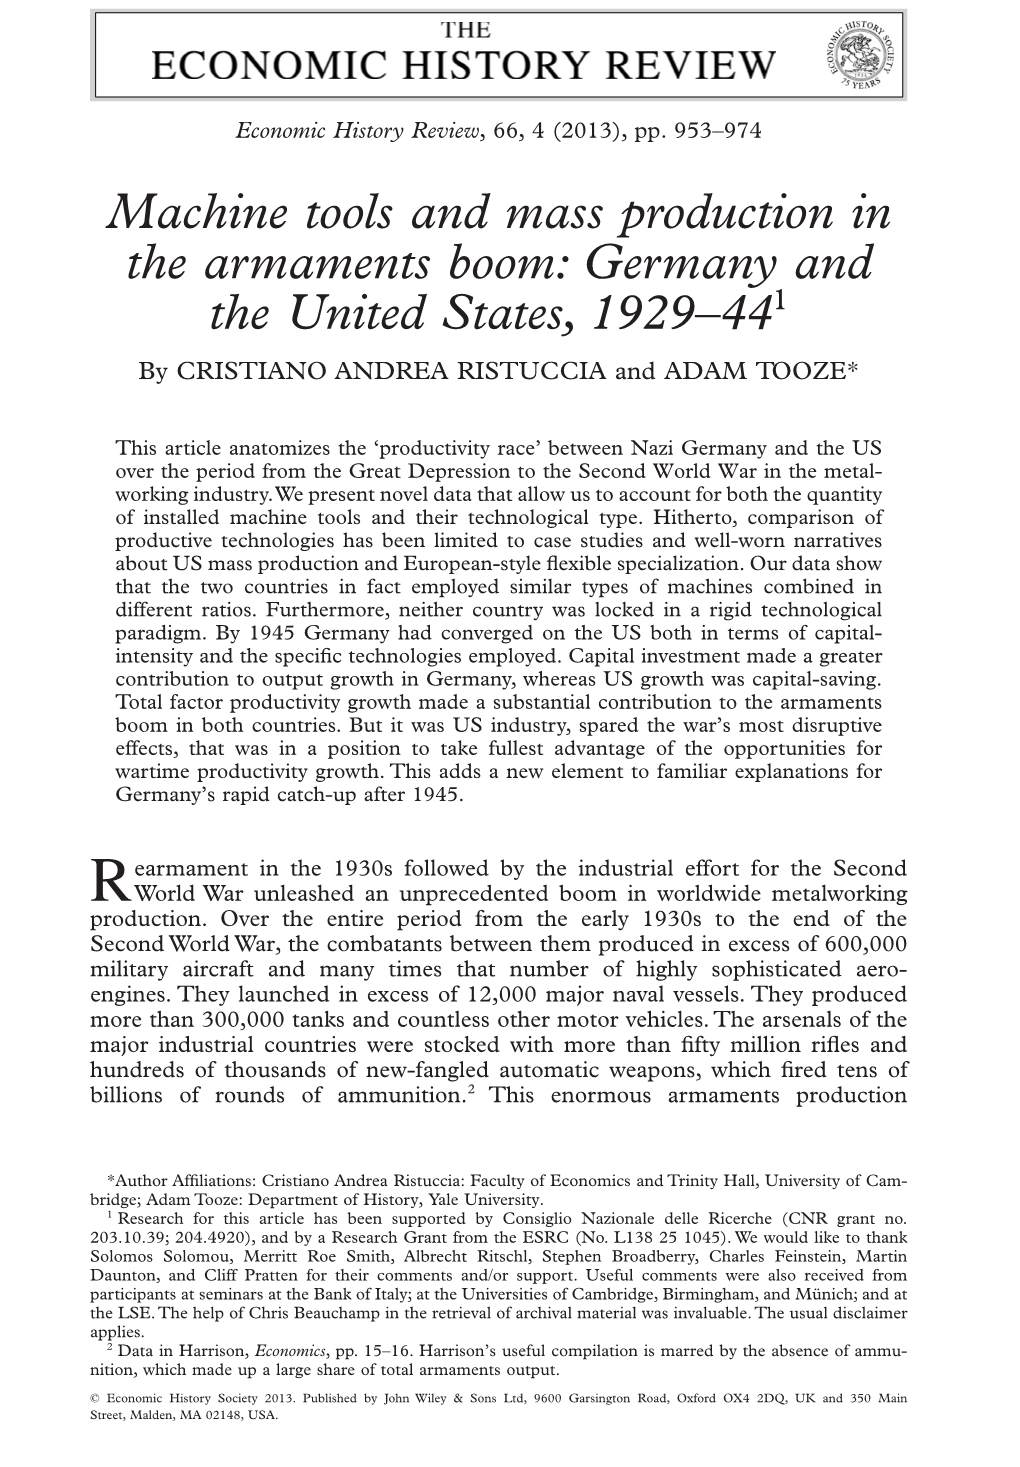 Machine Tools and Mass Production in the Armaments Boom: Germany and the United States, 1929–441 by CRISTIANO ANDREA RISTUCCIA and ADAM TOOZE*